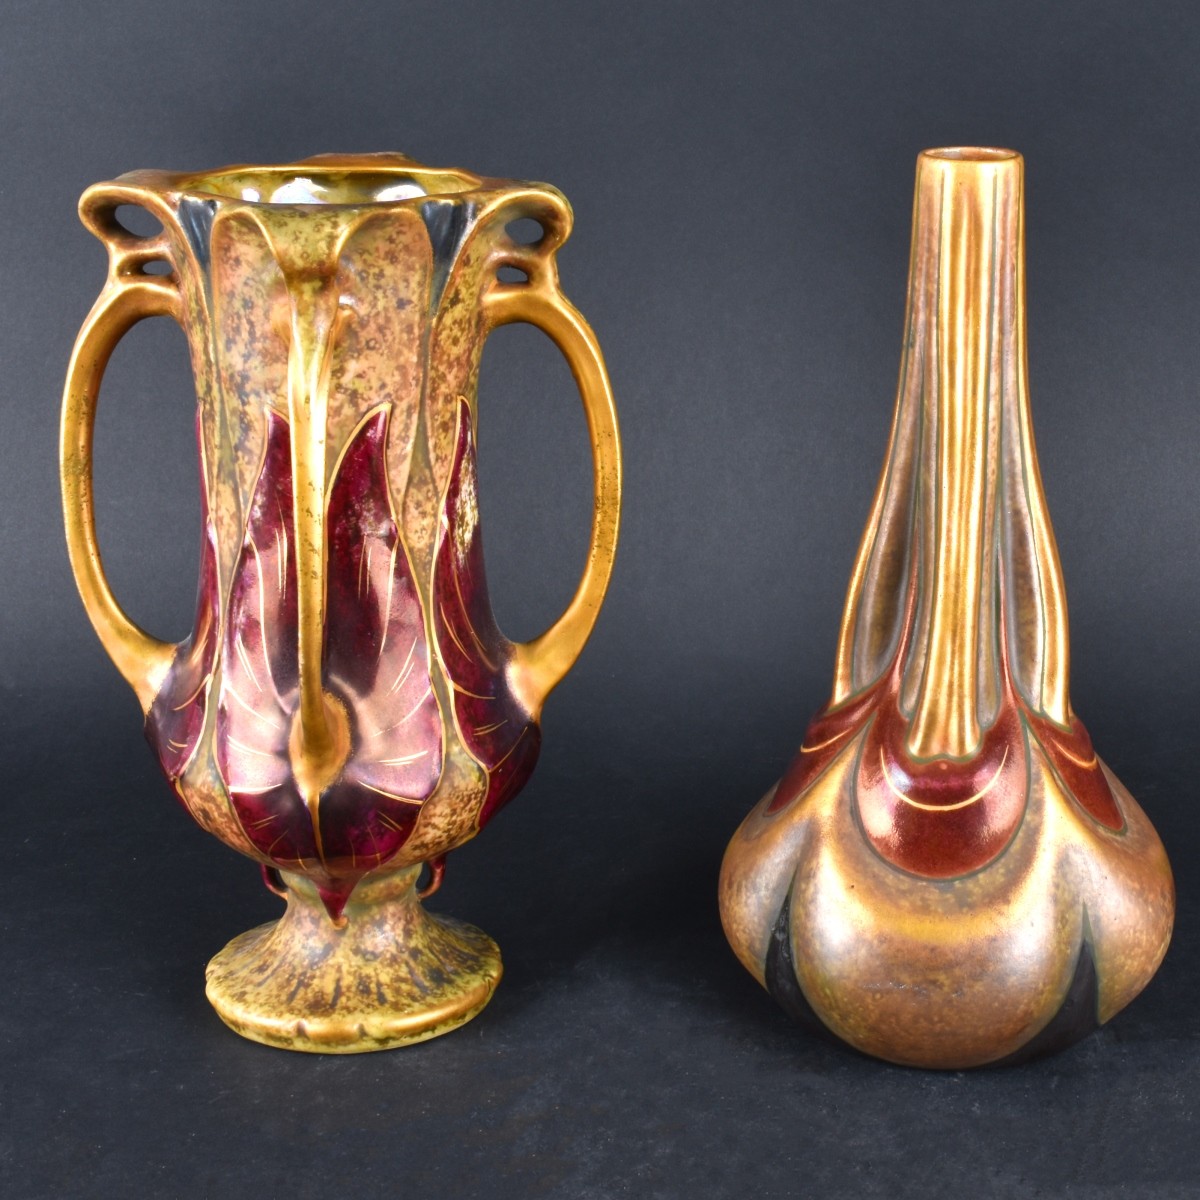 Two (2) Amphora Vases - Image 2 of 4